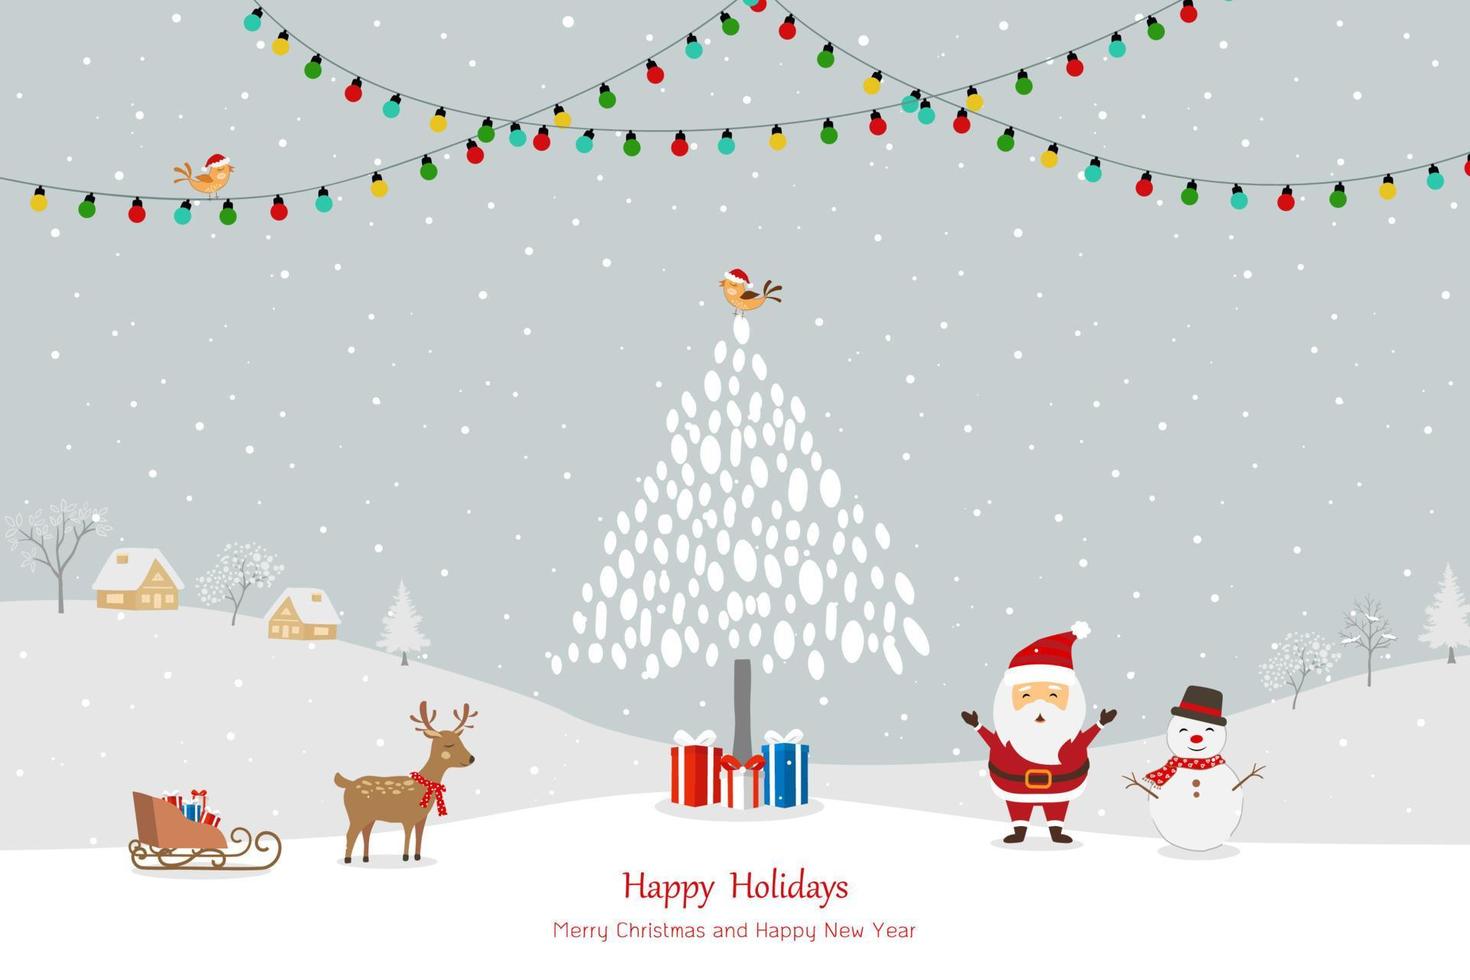 Merry Christmas and Happy New Year greeting card with Santa Claus happy on winter vector